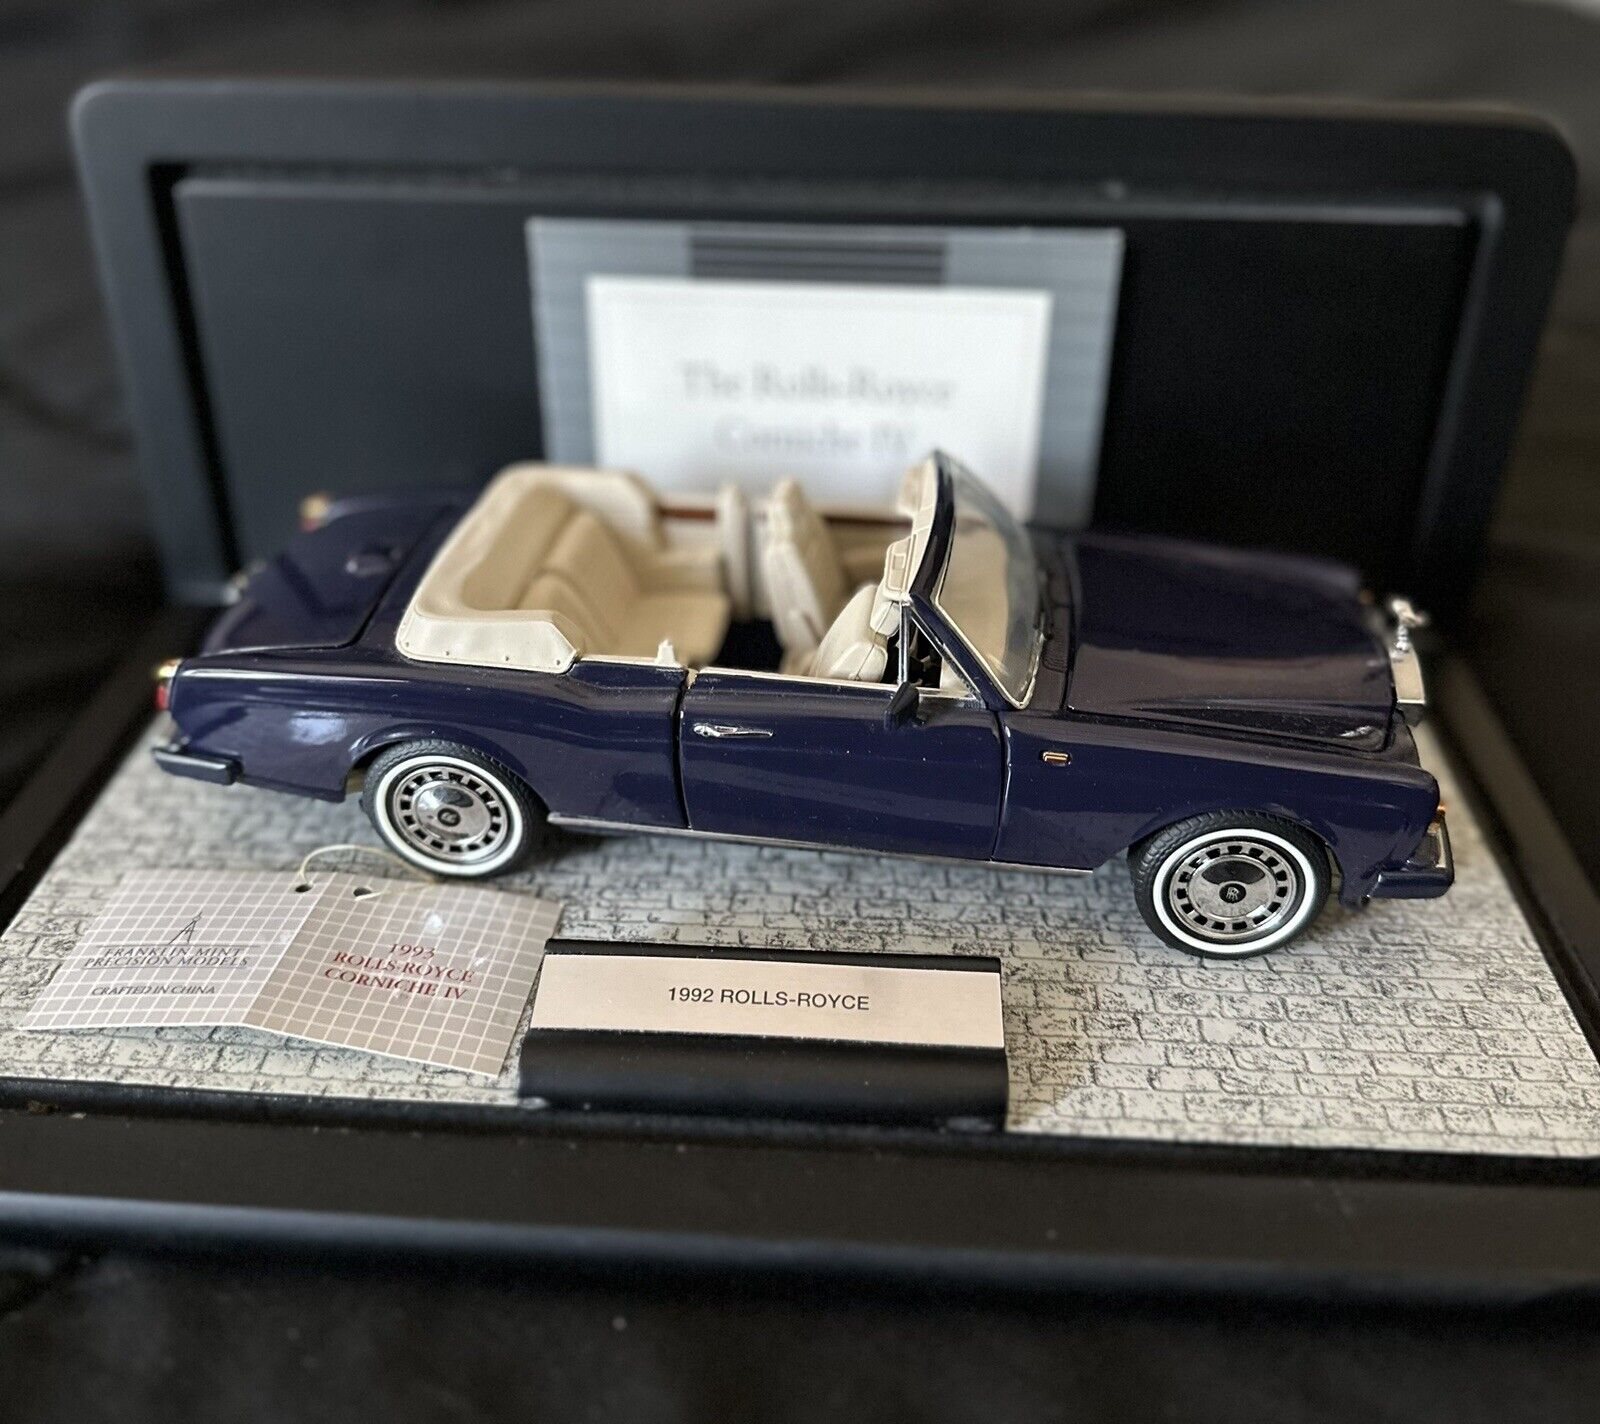 Rolls Royce Corniche IV 1:24 Scale Diecast Model From 1992 By Franklin Mint